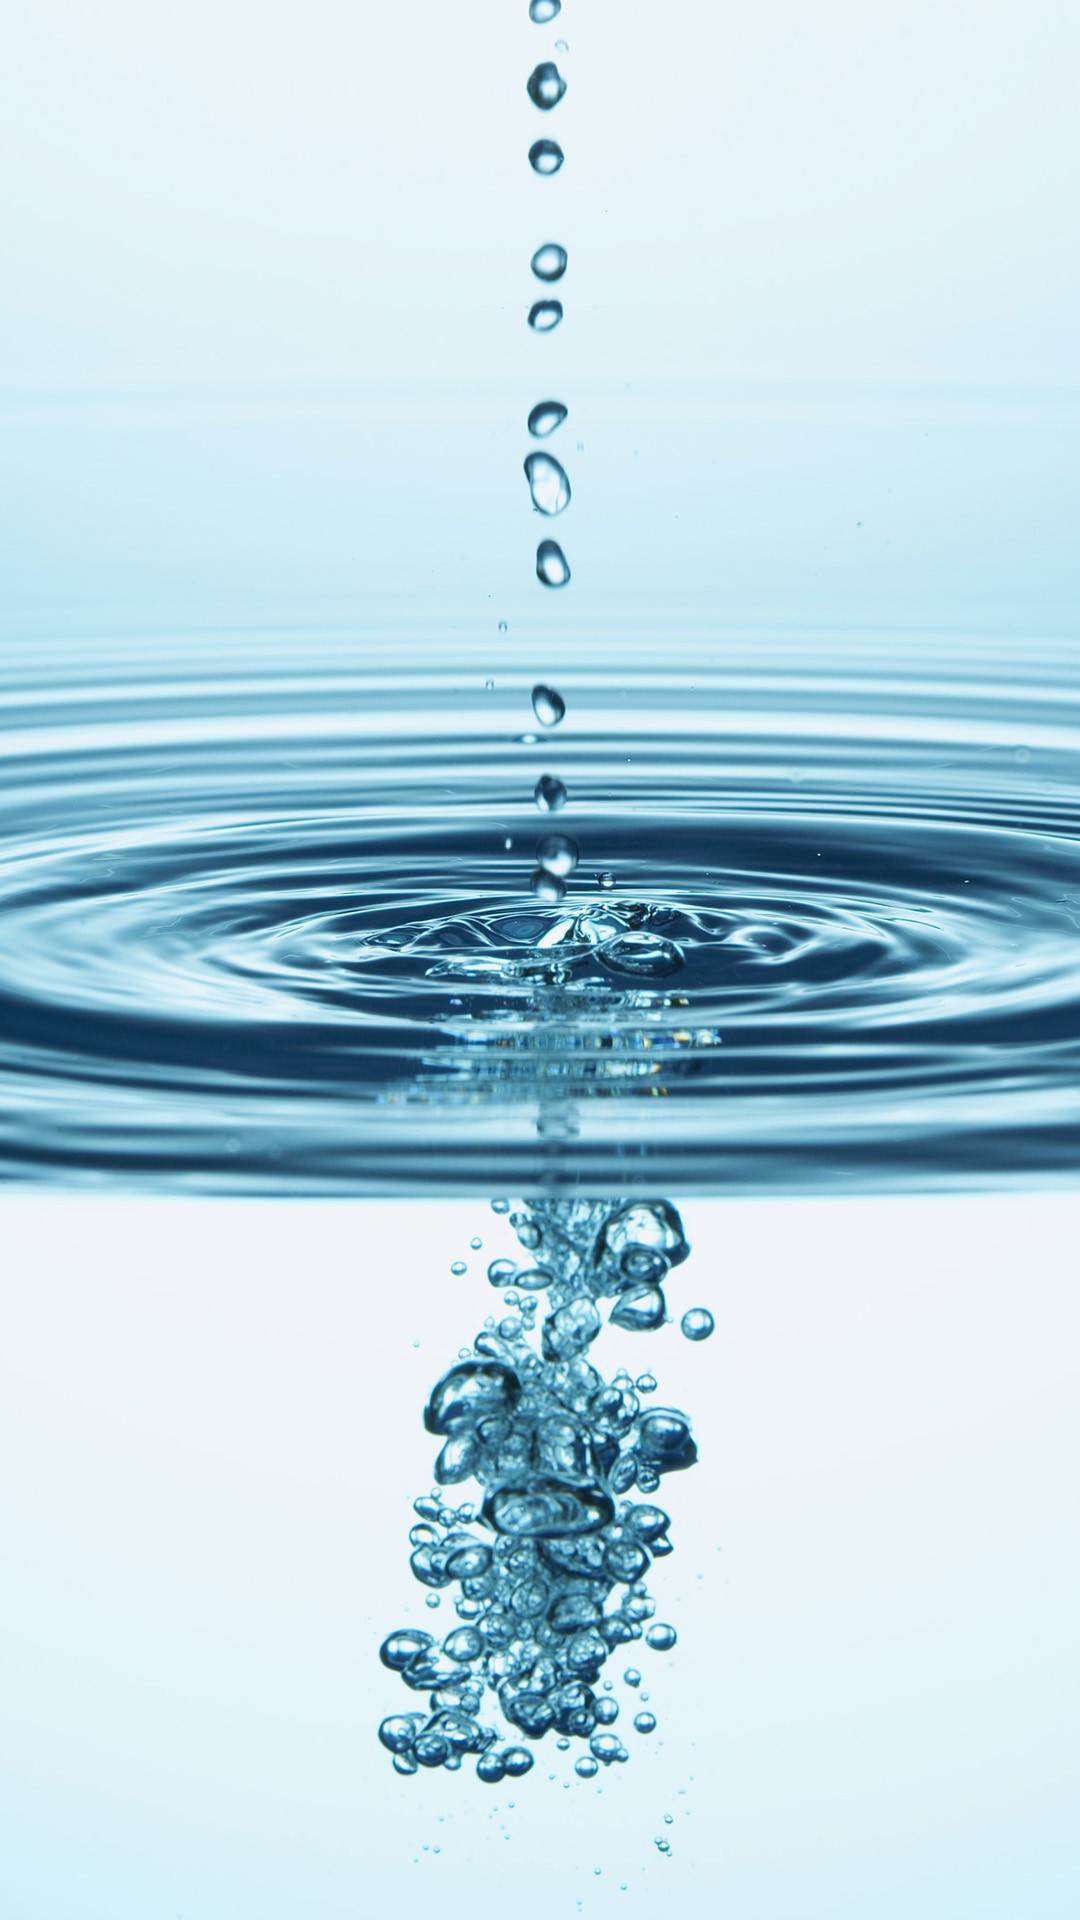 1080x1920 Wallpaper Weekends: Water Droplets for the iPhone 6 Plus ...